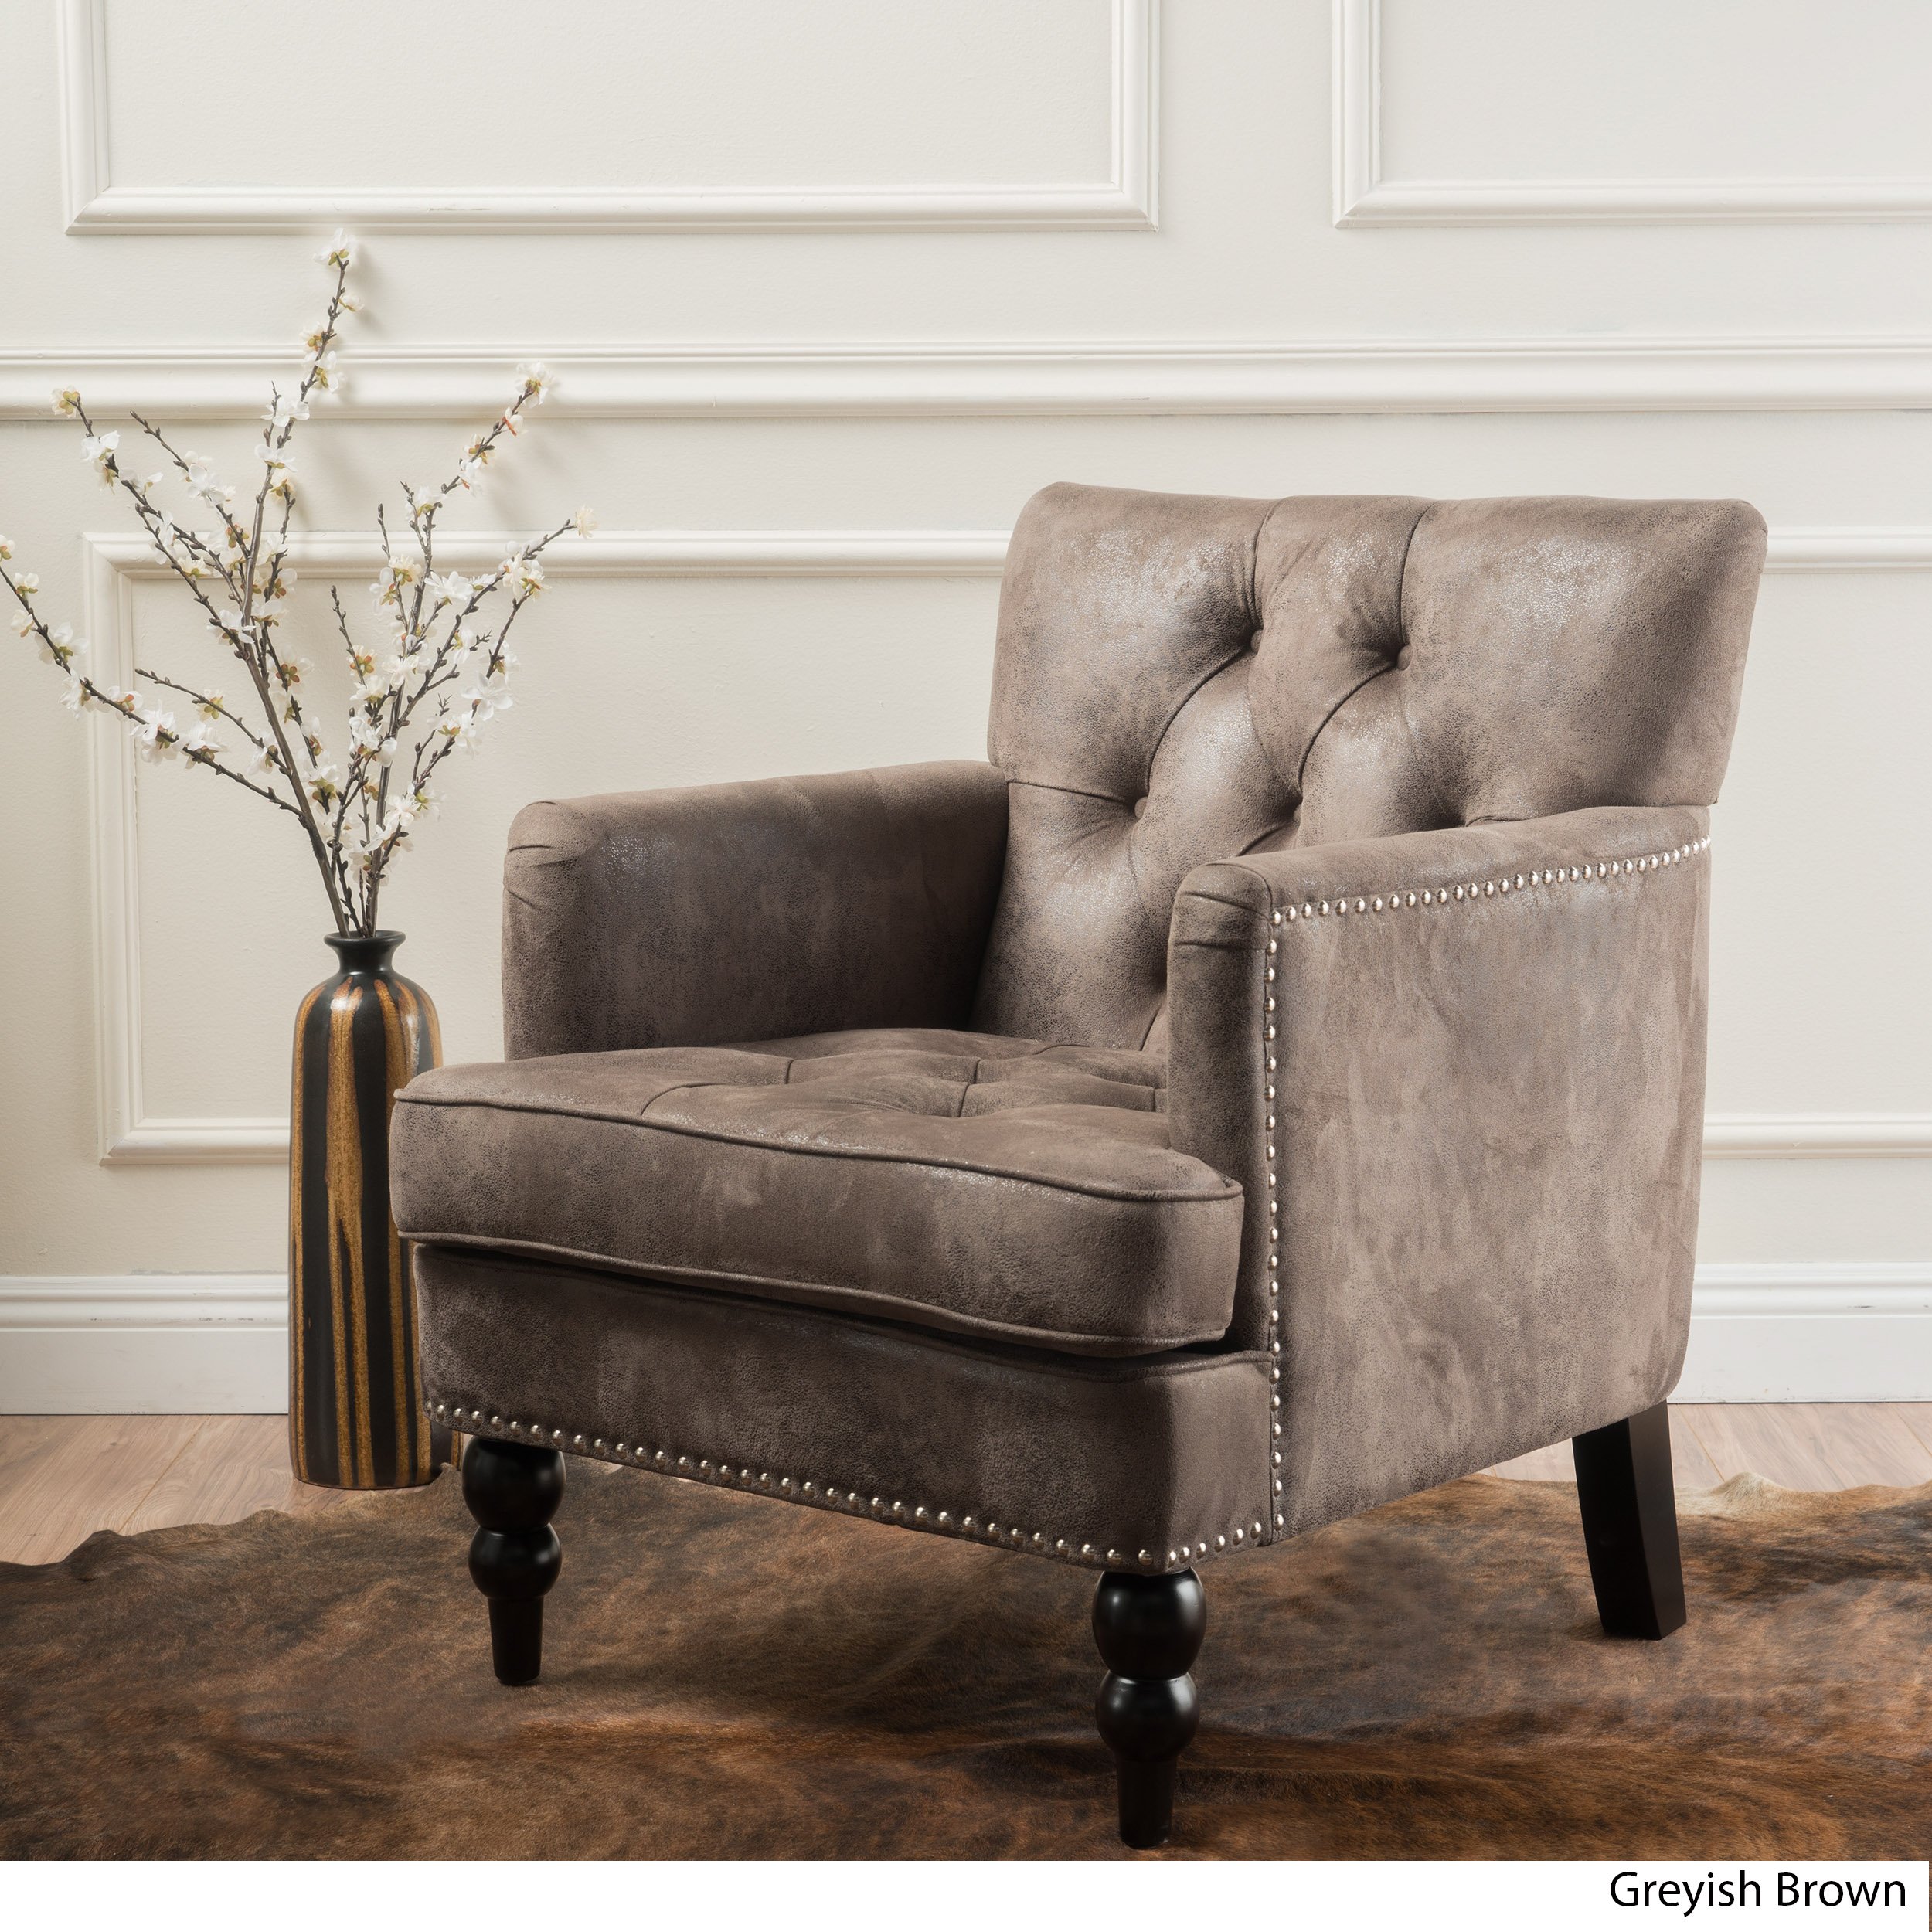 Medford Club Chair is Ideal for Small Spaces